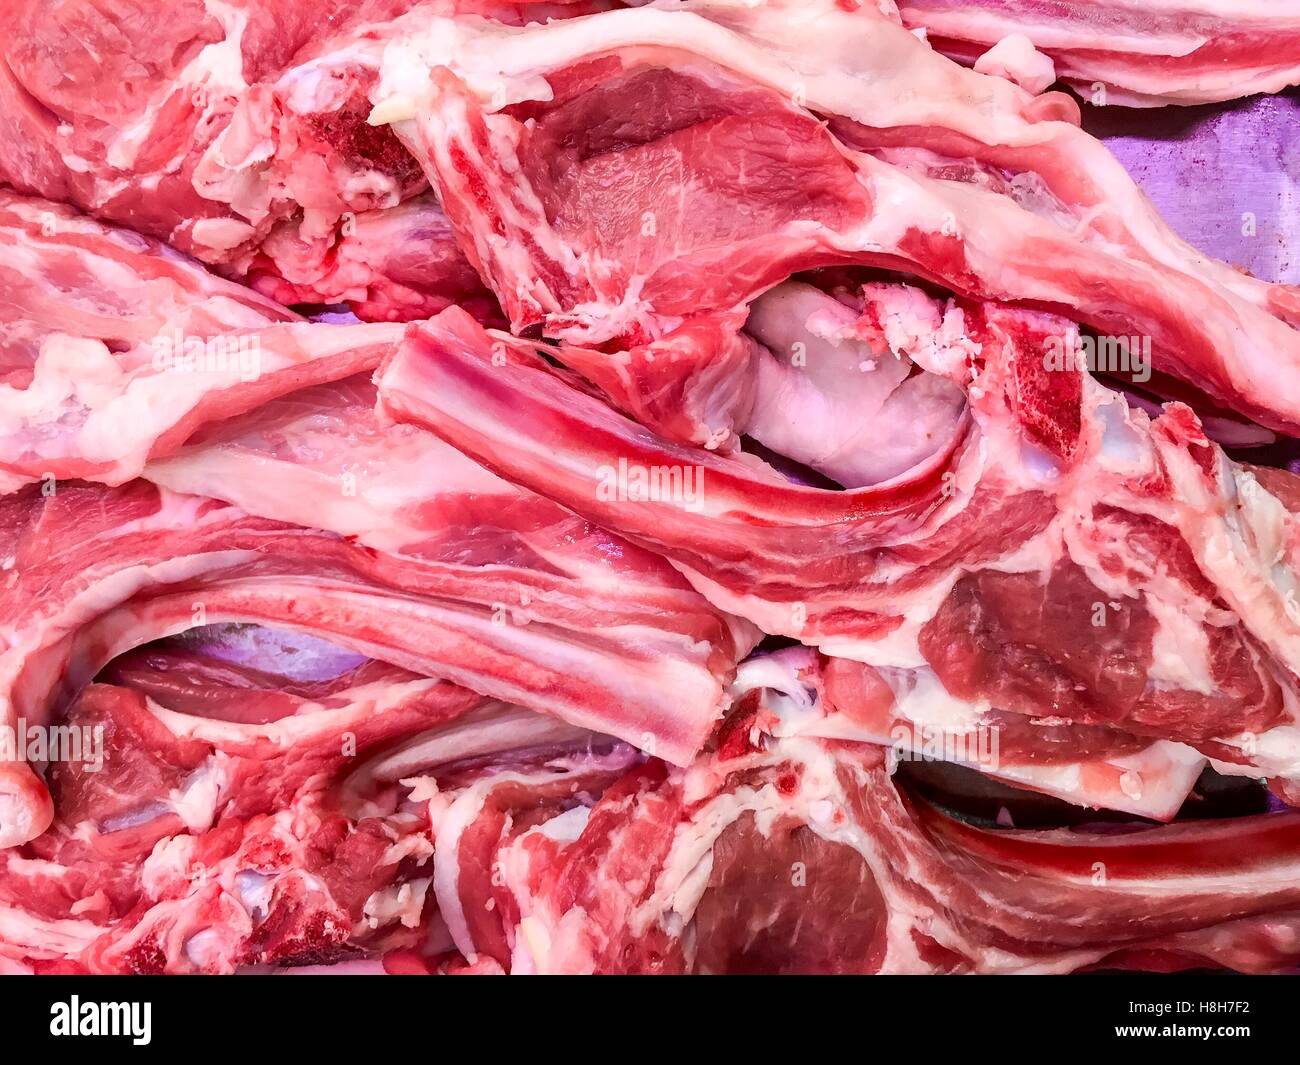 Raw Turkish Traditional Chop Steak, Meat, beef ready for cook at a restaurant Stock Photo